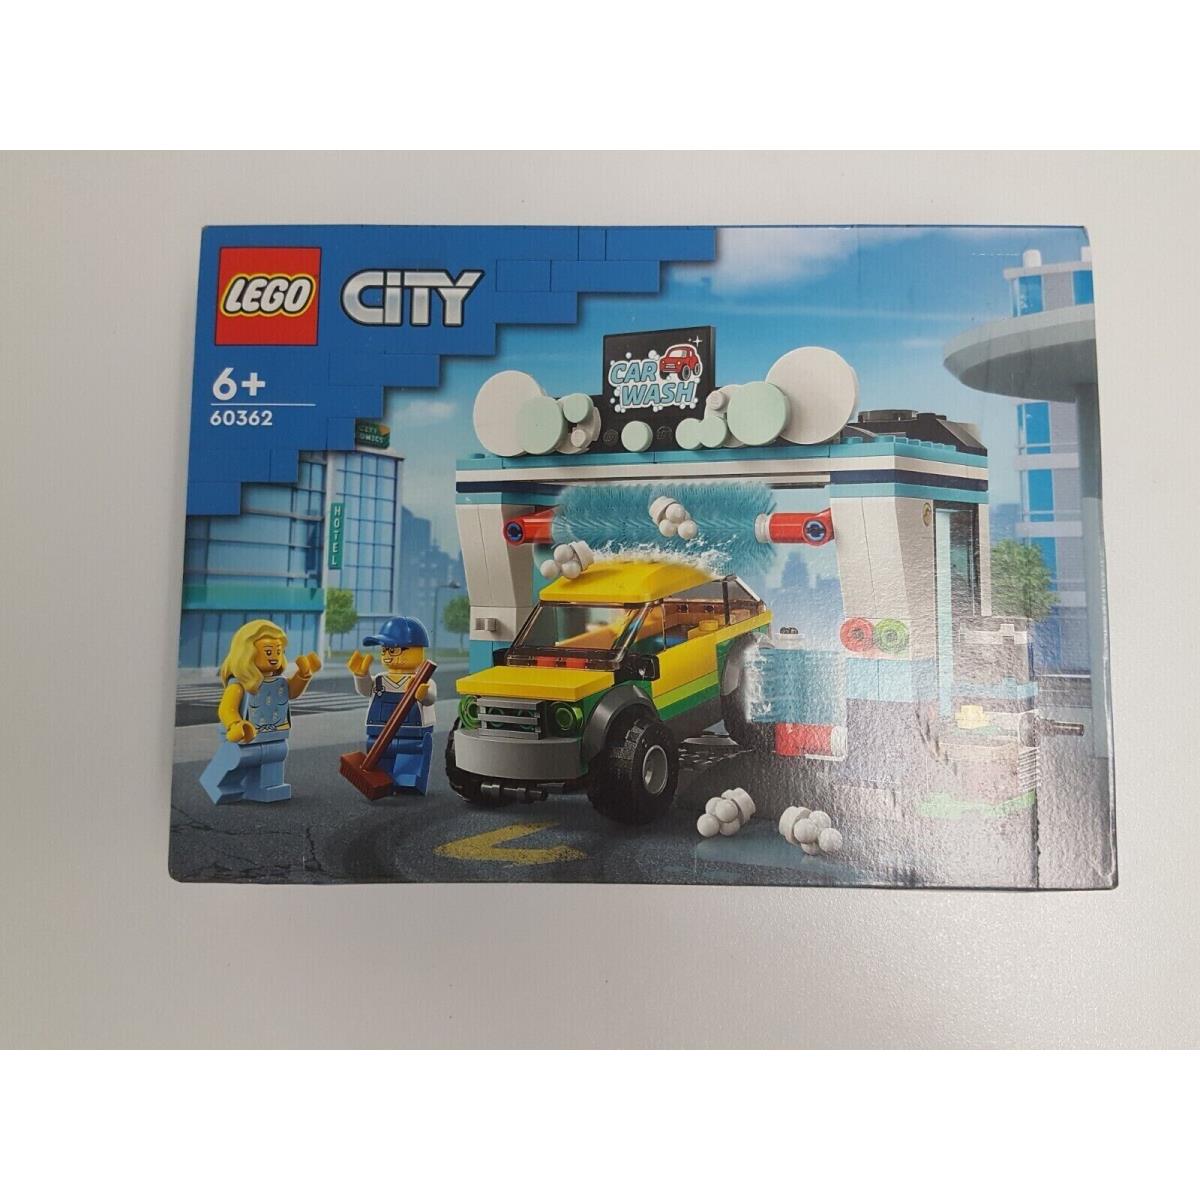 Lego City Car Wash 60362 Building Toy Set Fun Gift Idea For Kids Ages 6+